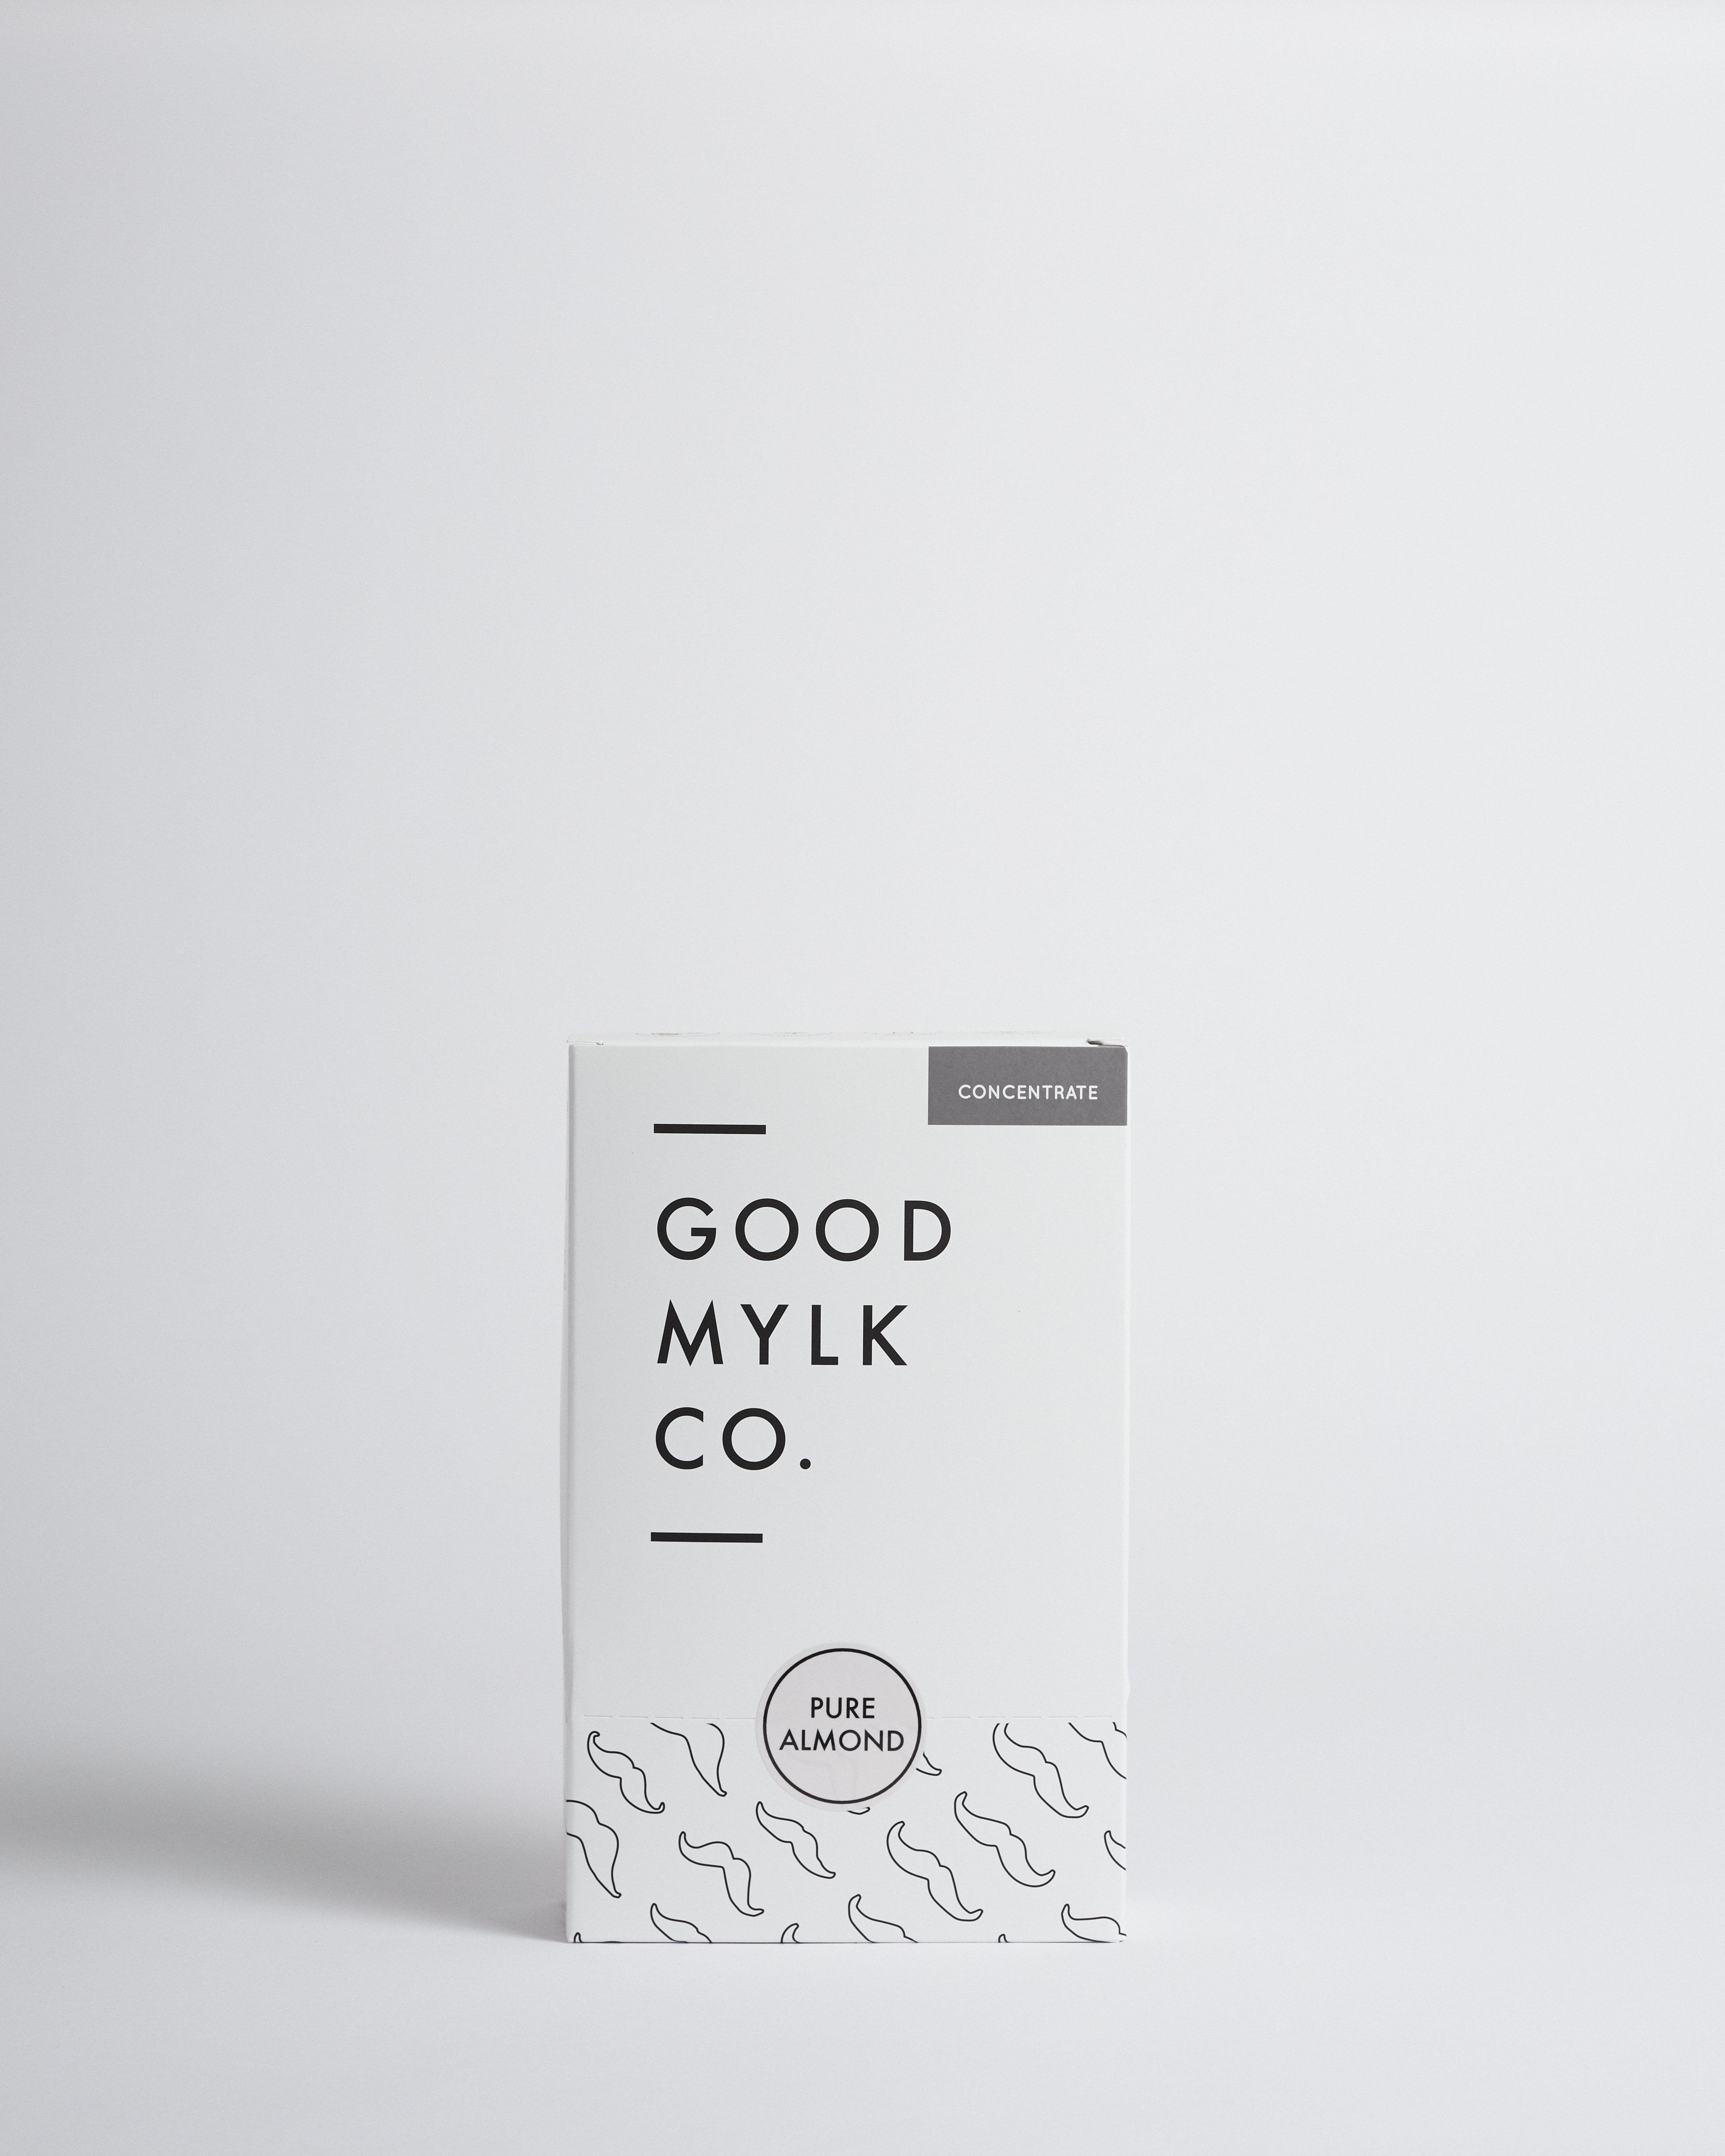 Almond Mylk Concentrate Goodmylk Co. Pure (Unsweetened) 2-Pack 